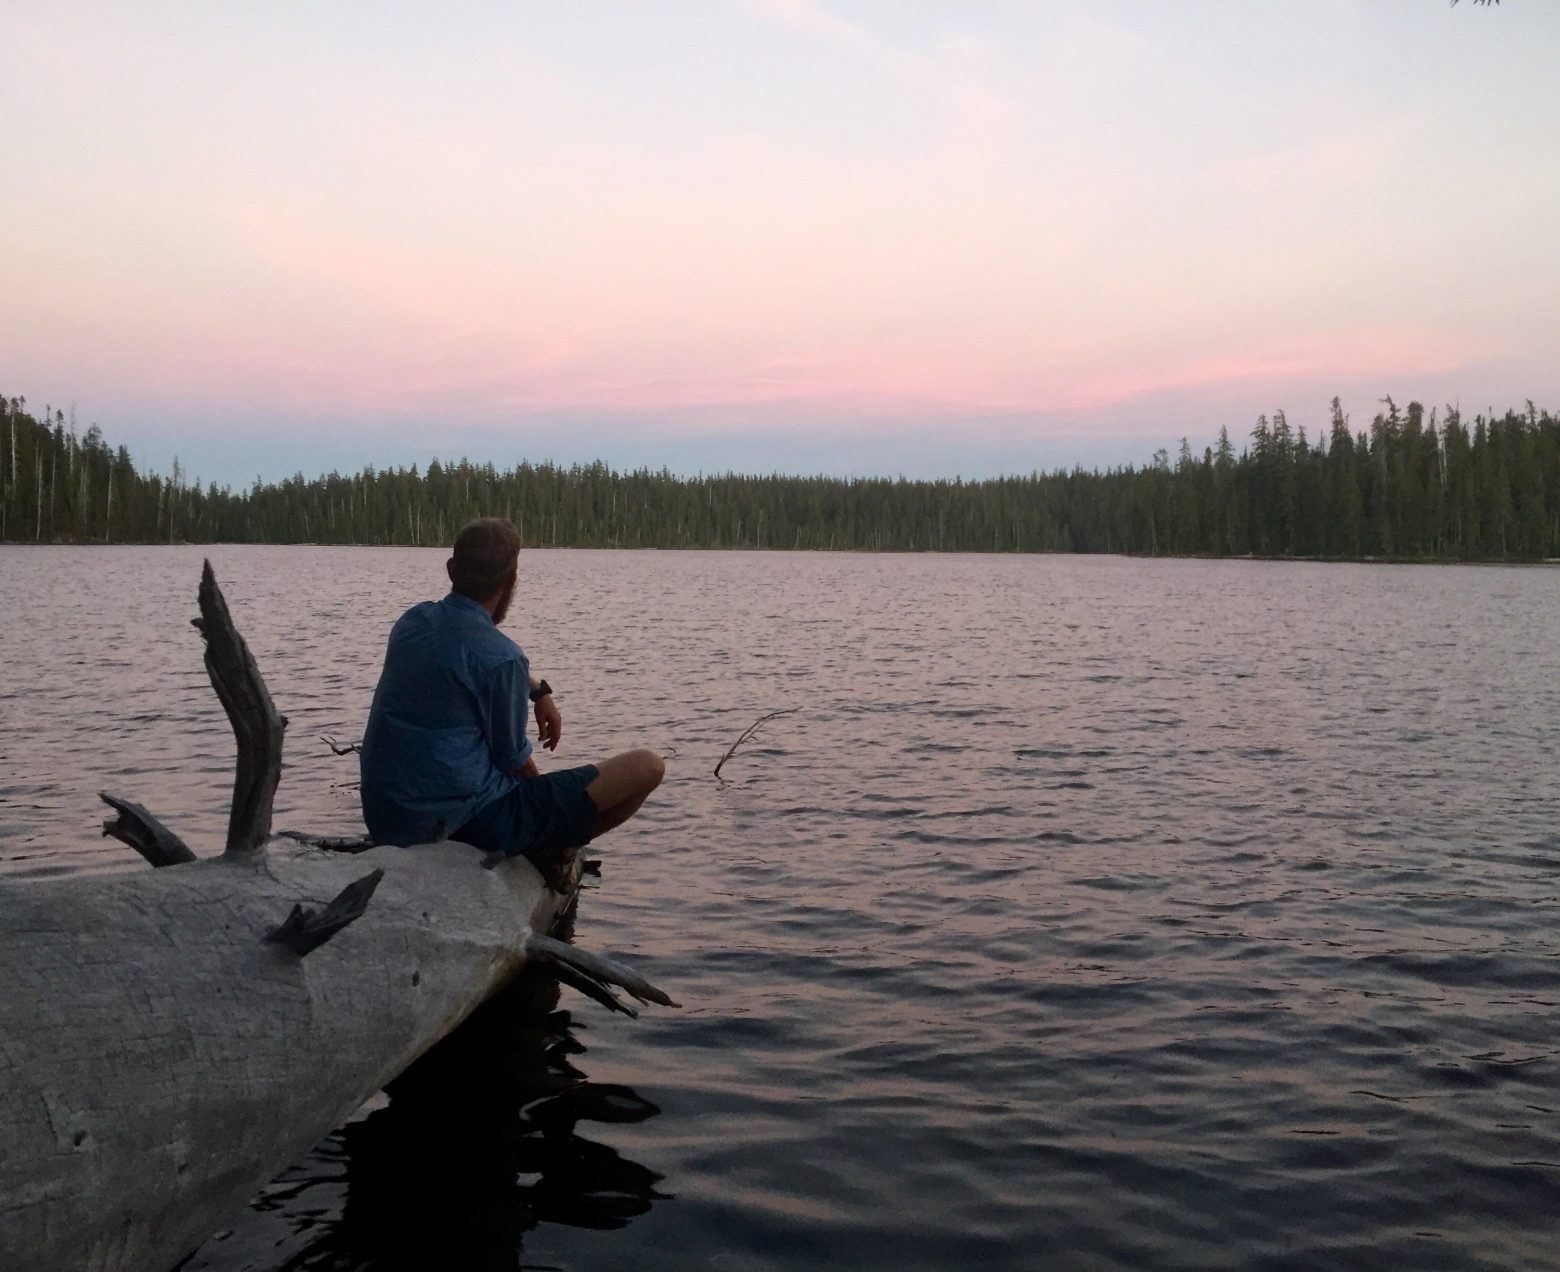 Mountain Man gazing out over Charlton lake at sunset from a dead log extending into the water